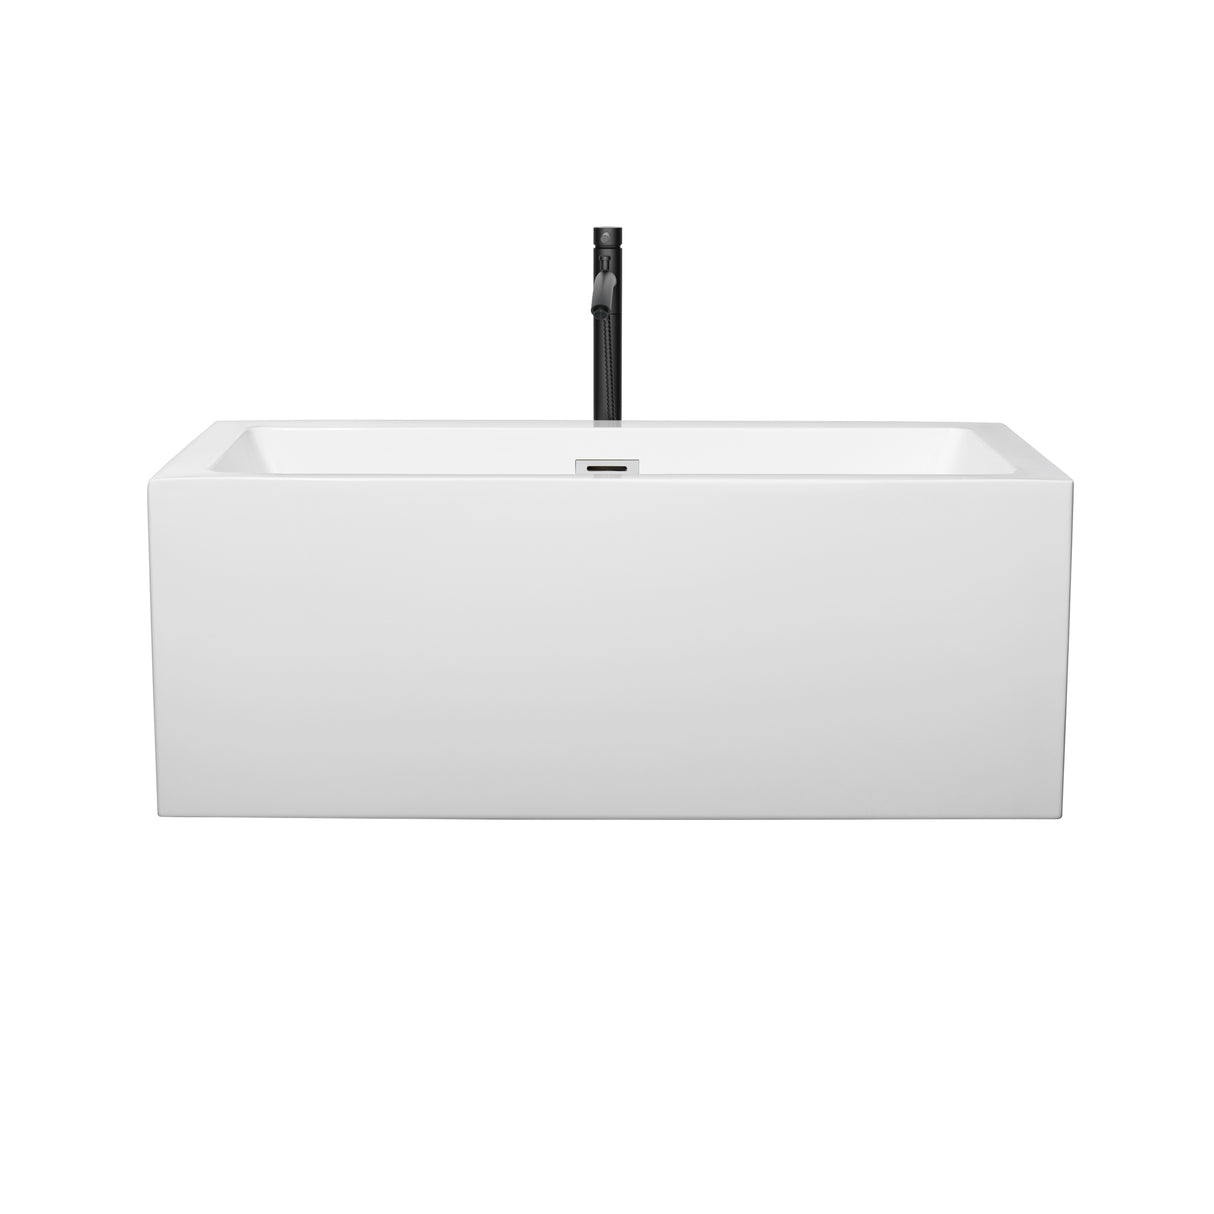 Melody 60 Inch Freestanding Bathtub in White with Polished Chrome Trim and Floor Mounted Faucet in Matte Black